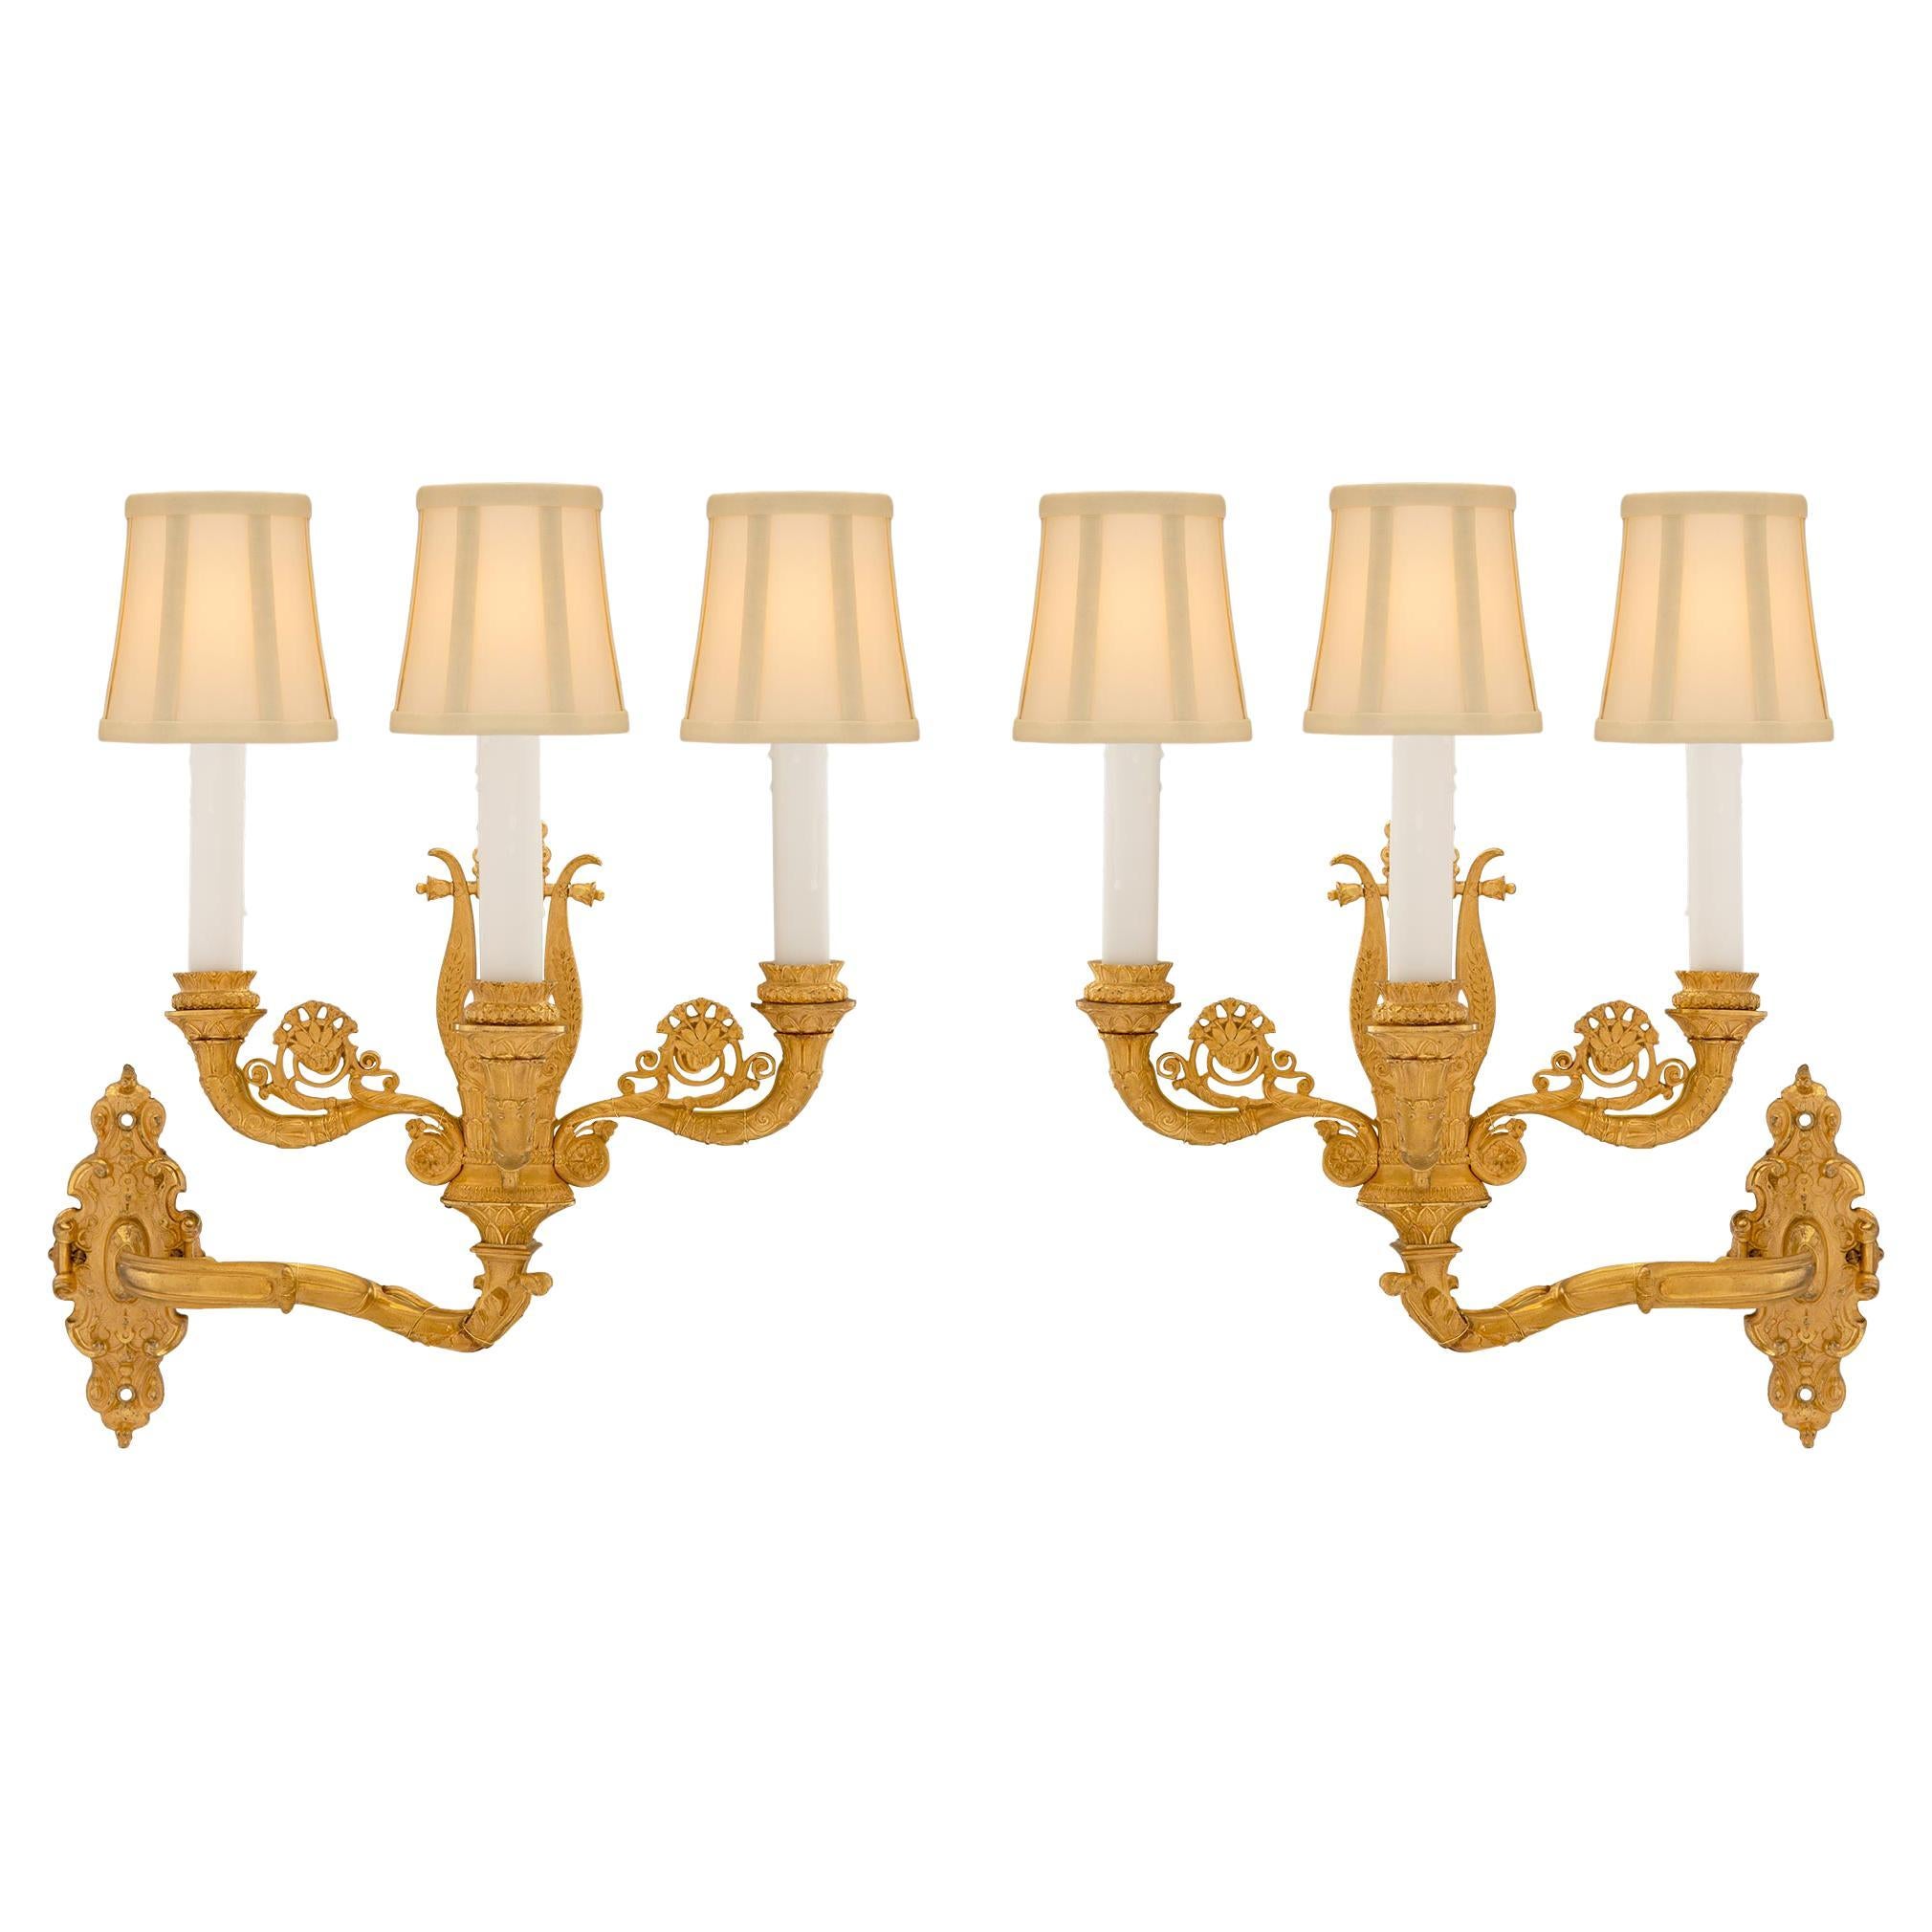 Pair of French 19th Century Charles X Period Ormolu Sconces For Sale